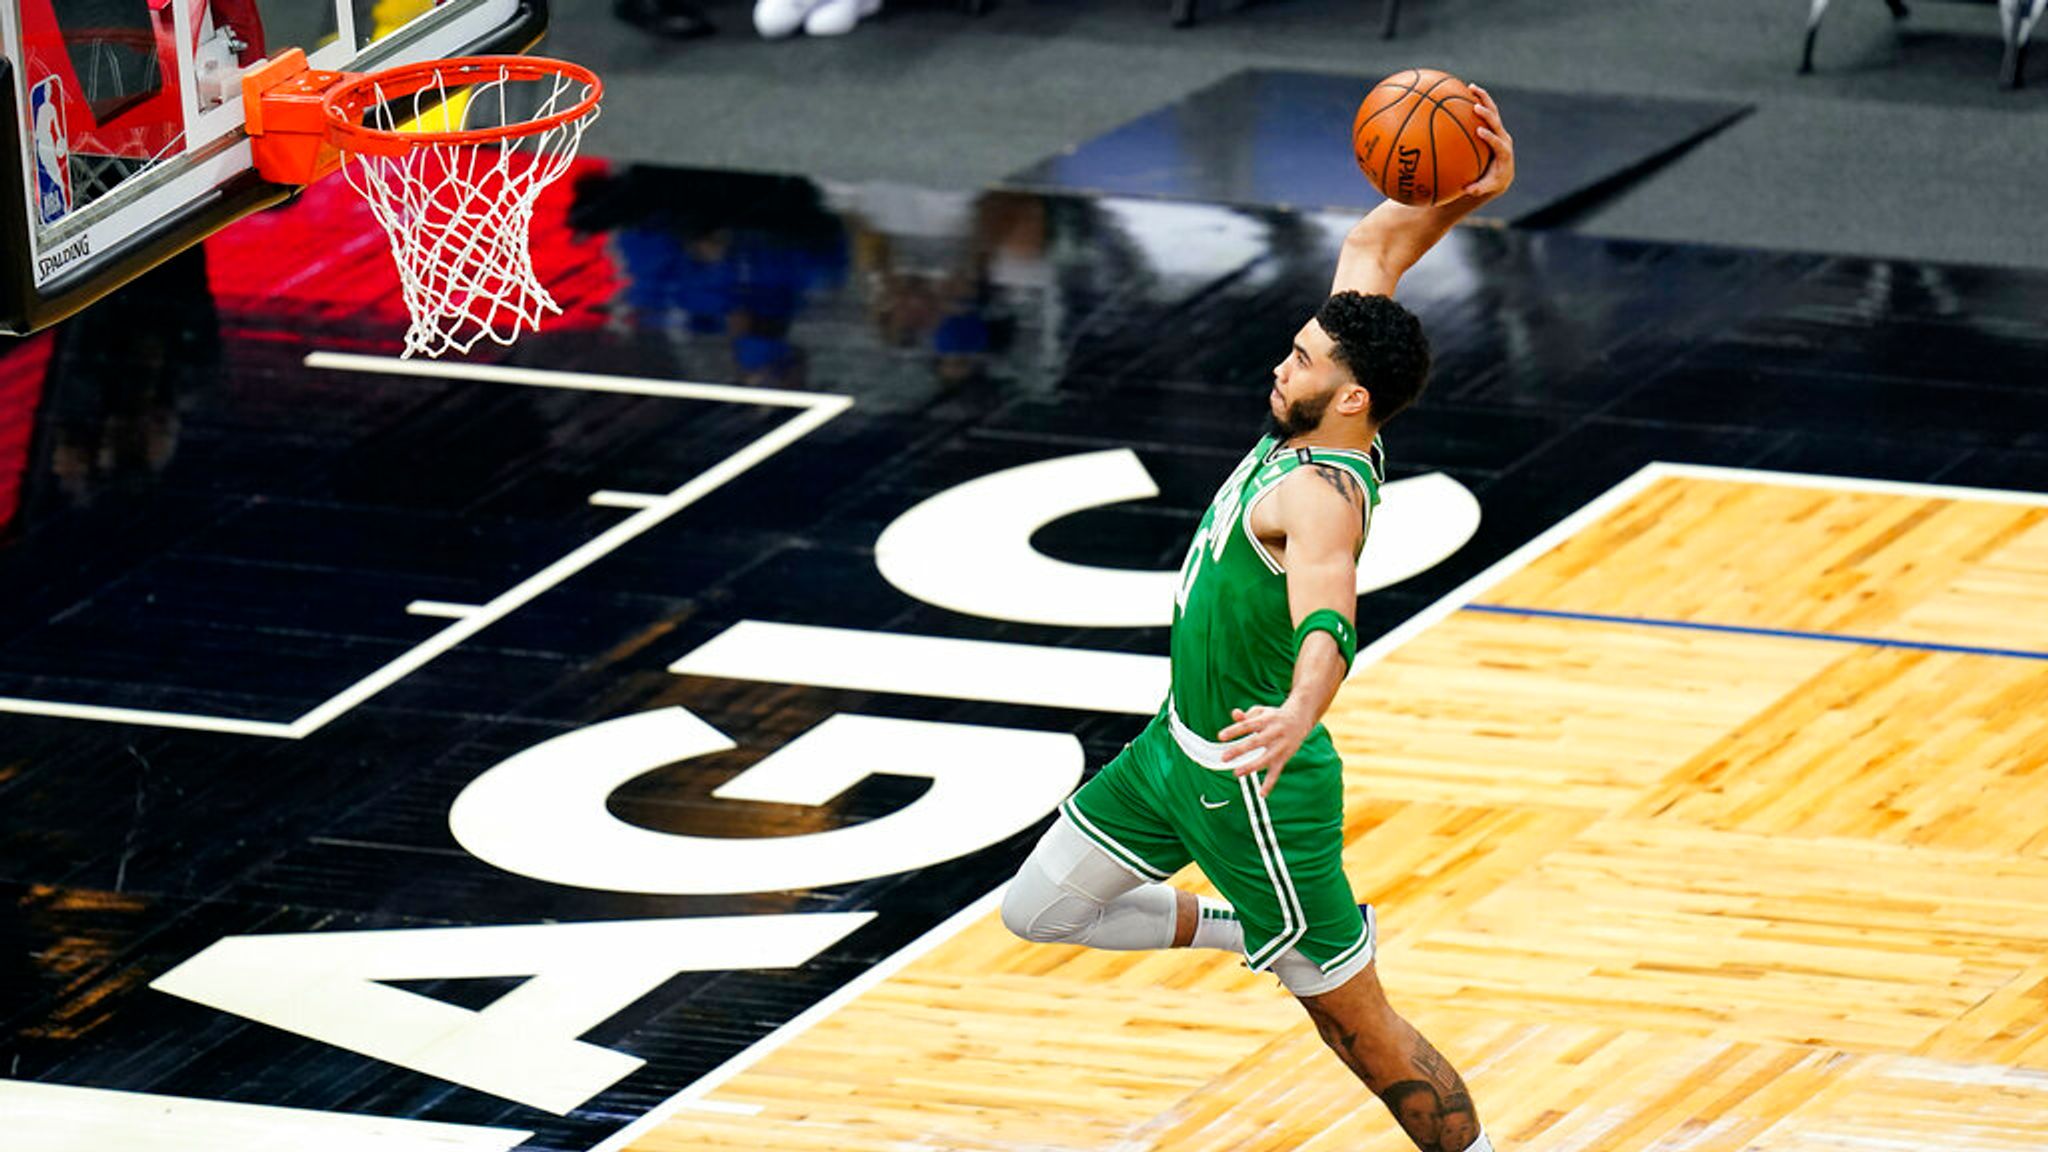 How can Jayson Tatum and the Celtics become a contender? Key steps identified after Boston's sluggish start to the season